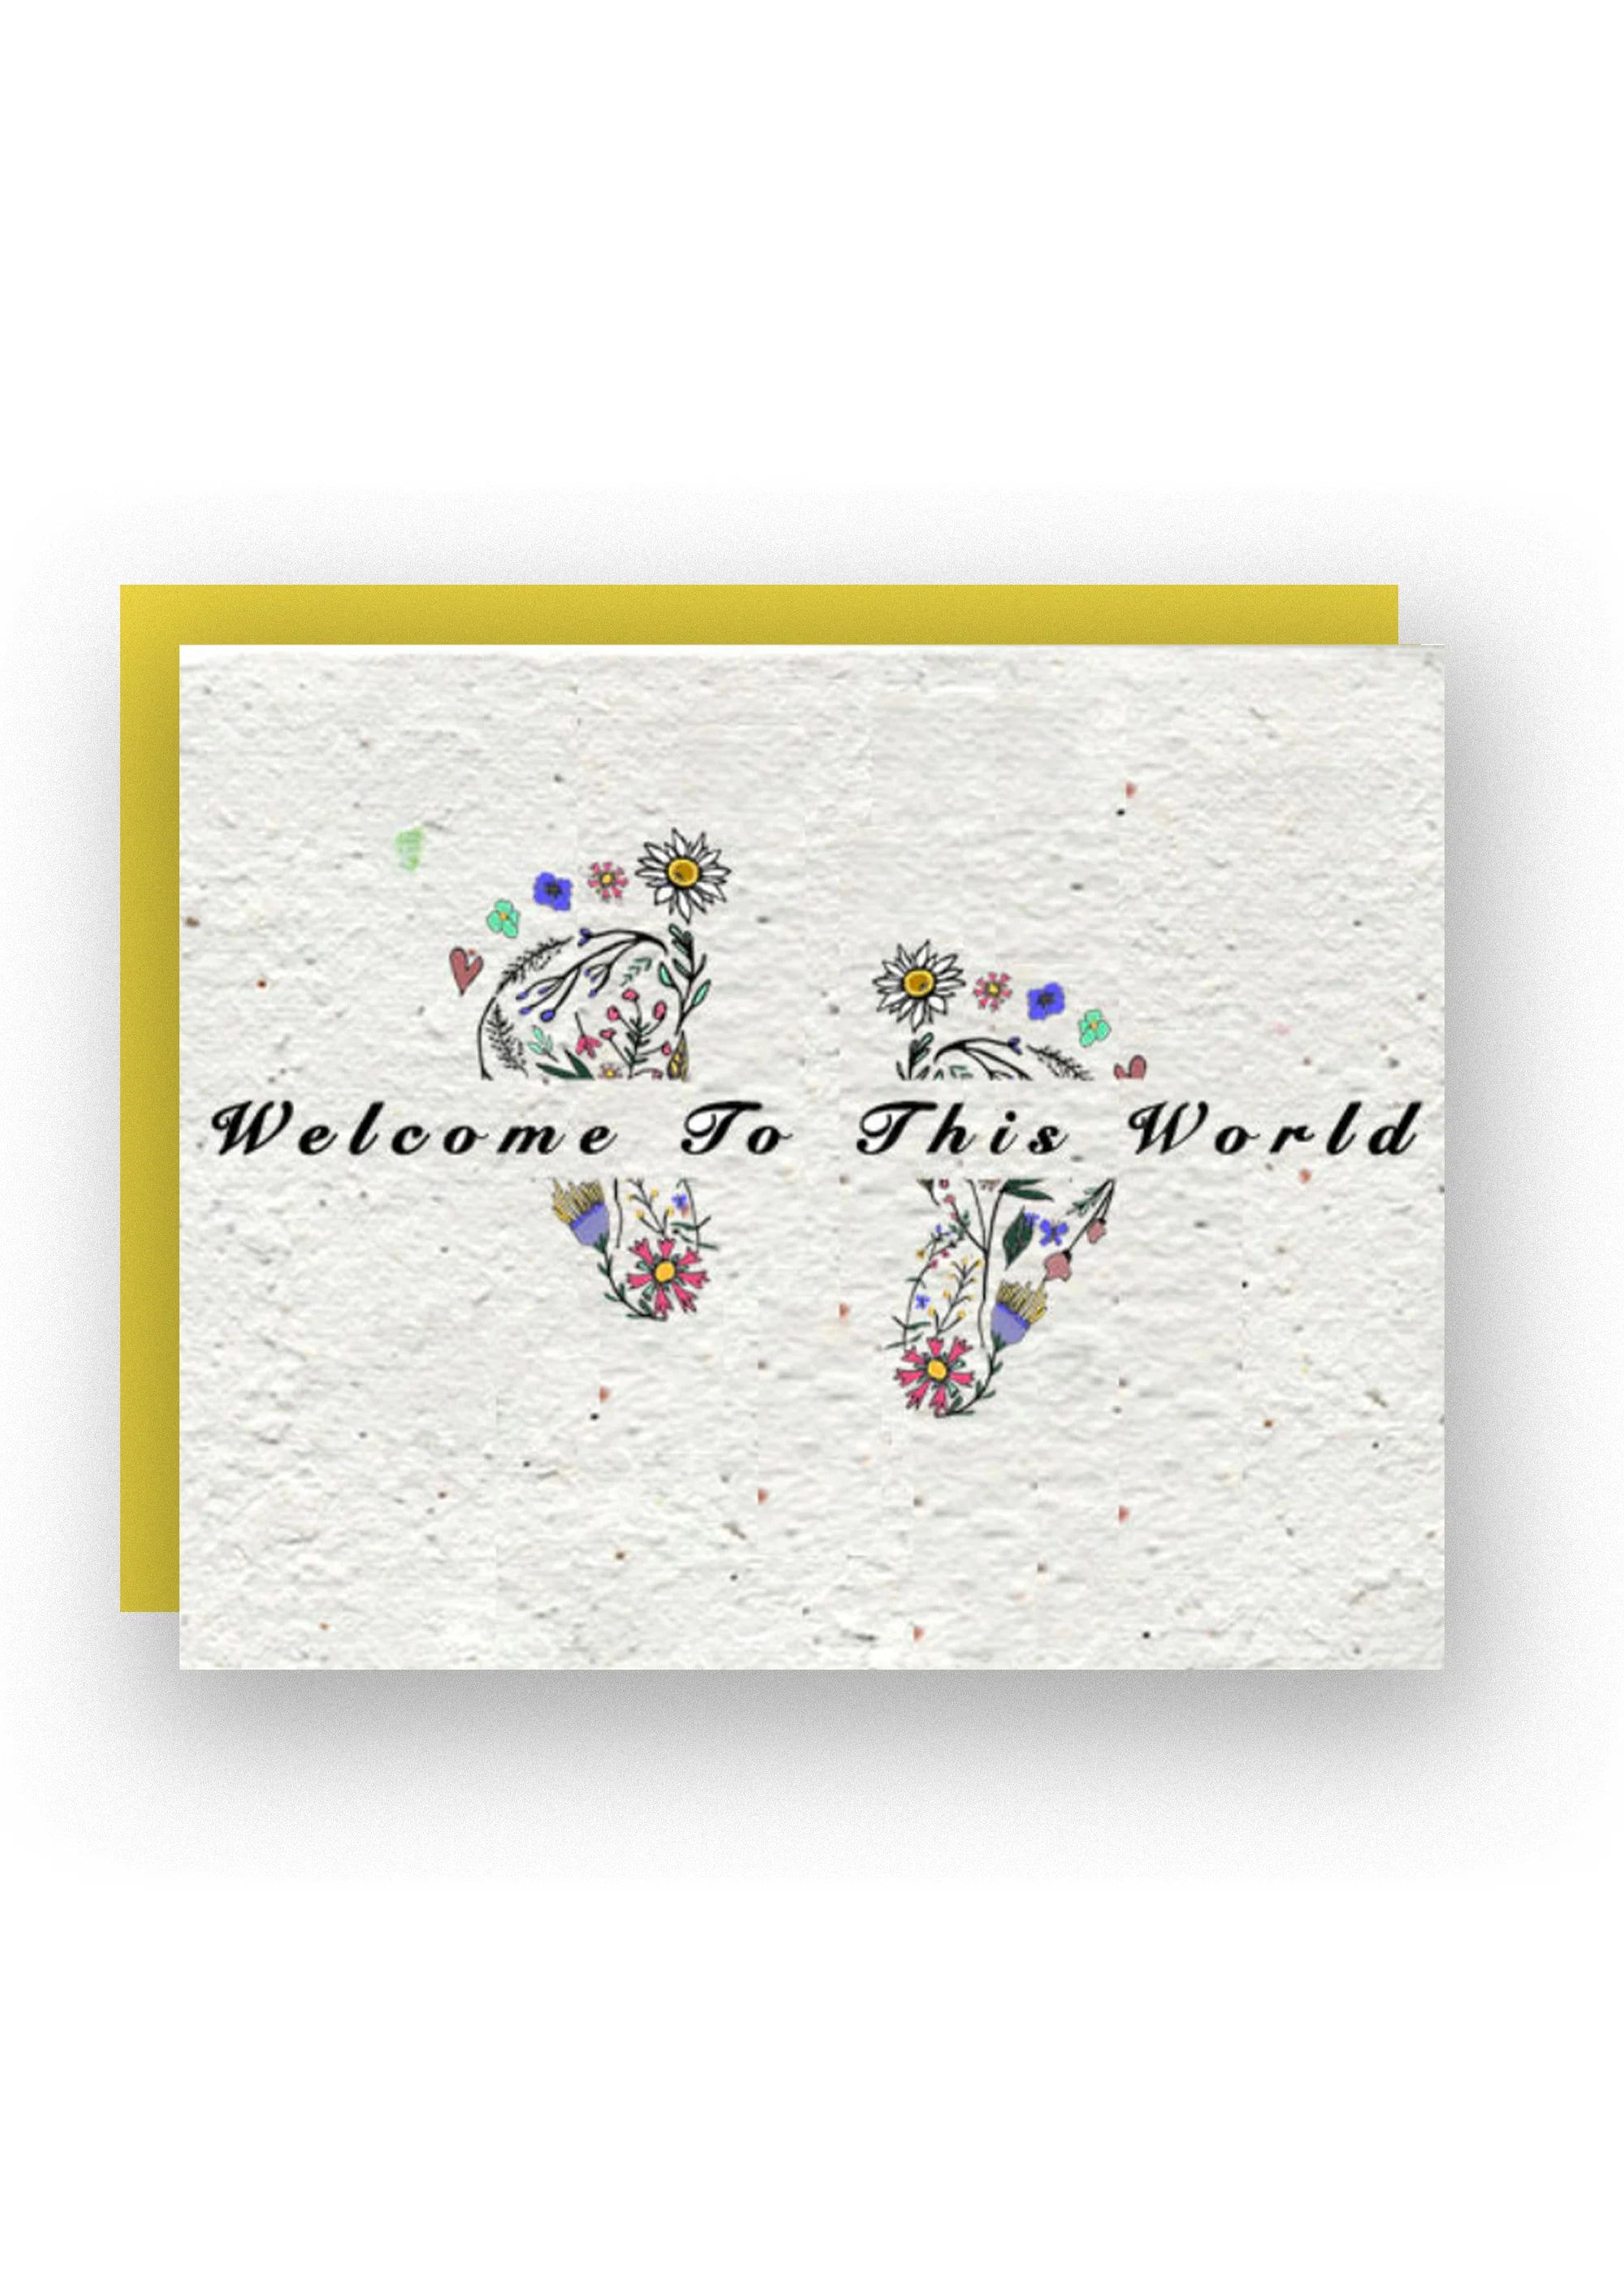 Welcome to this world "plant me" Artisan paper card